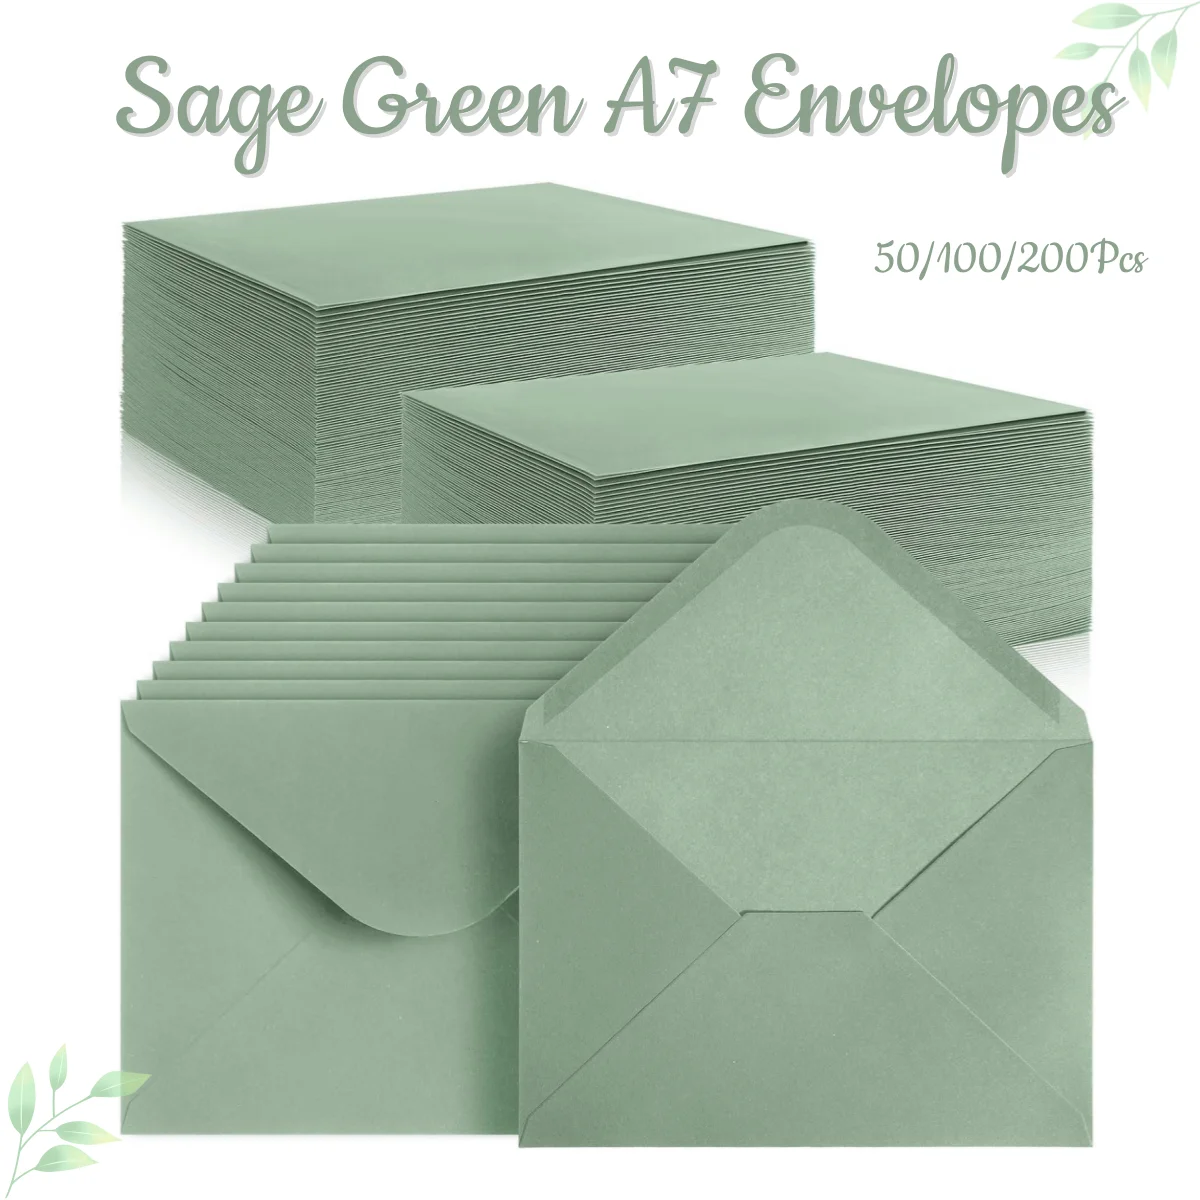 50-200PCS Sage Green Envelopes 5.2x7.2Inch Wedding Invitation Cards Printable Self Business Postcards For Baby Shower Birthday